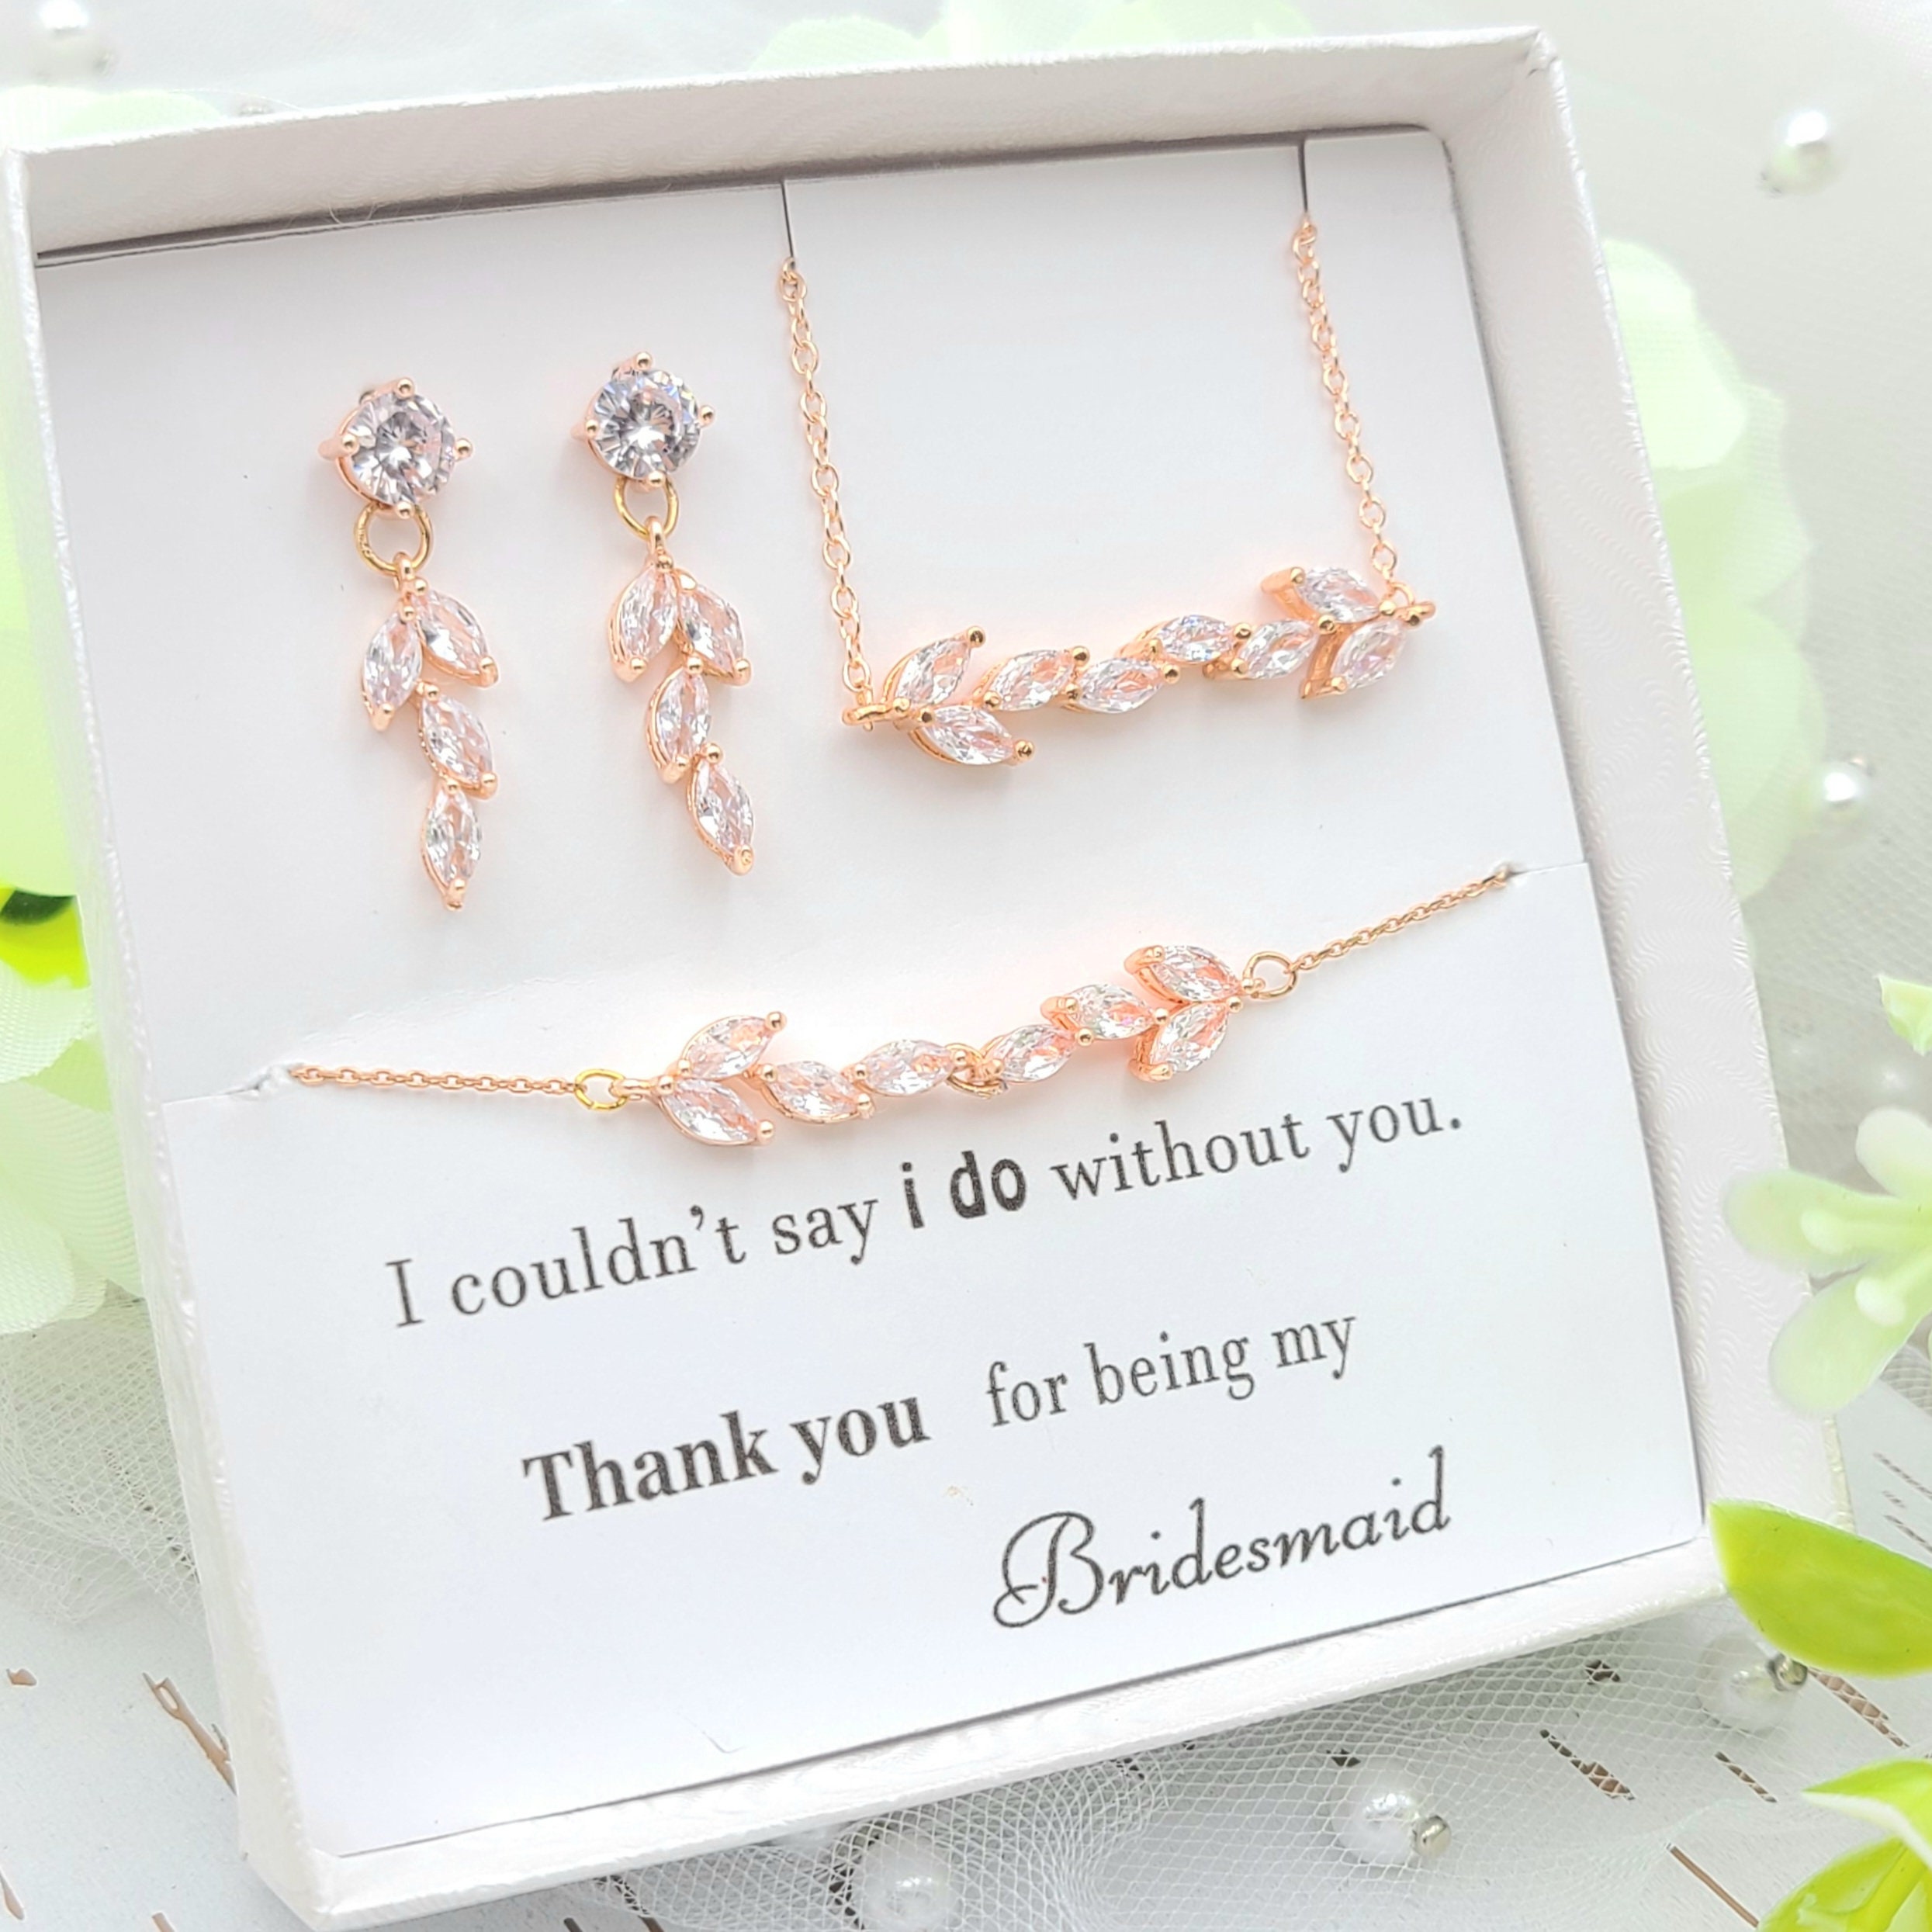 Personalized Bridesmaid Gifts,Gold Bridesmaid Earrings,Jewelry Set,Rose Gold  Bracelet Necklace Bridal Wedding Party Gifts in Box - AliExpress